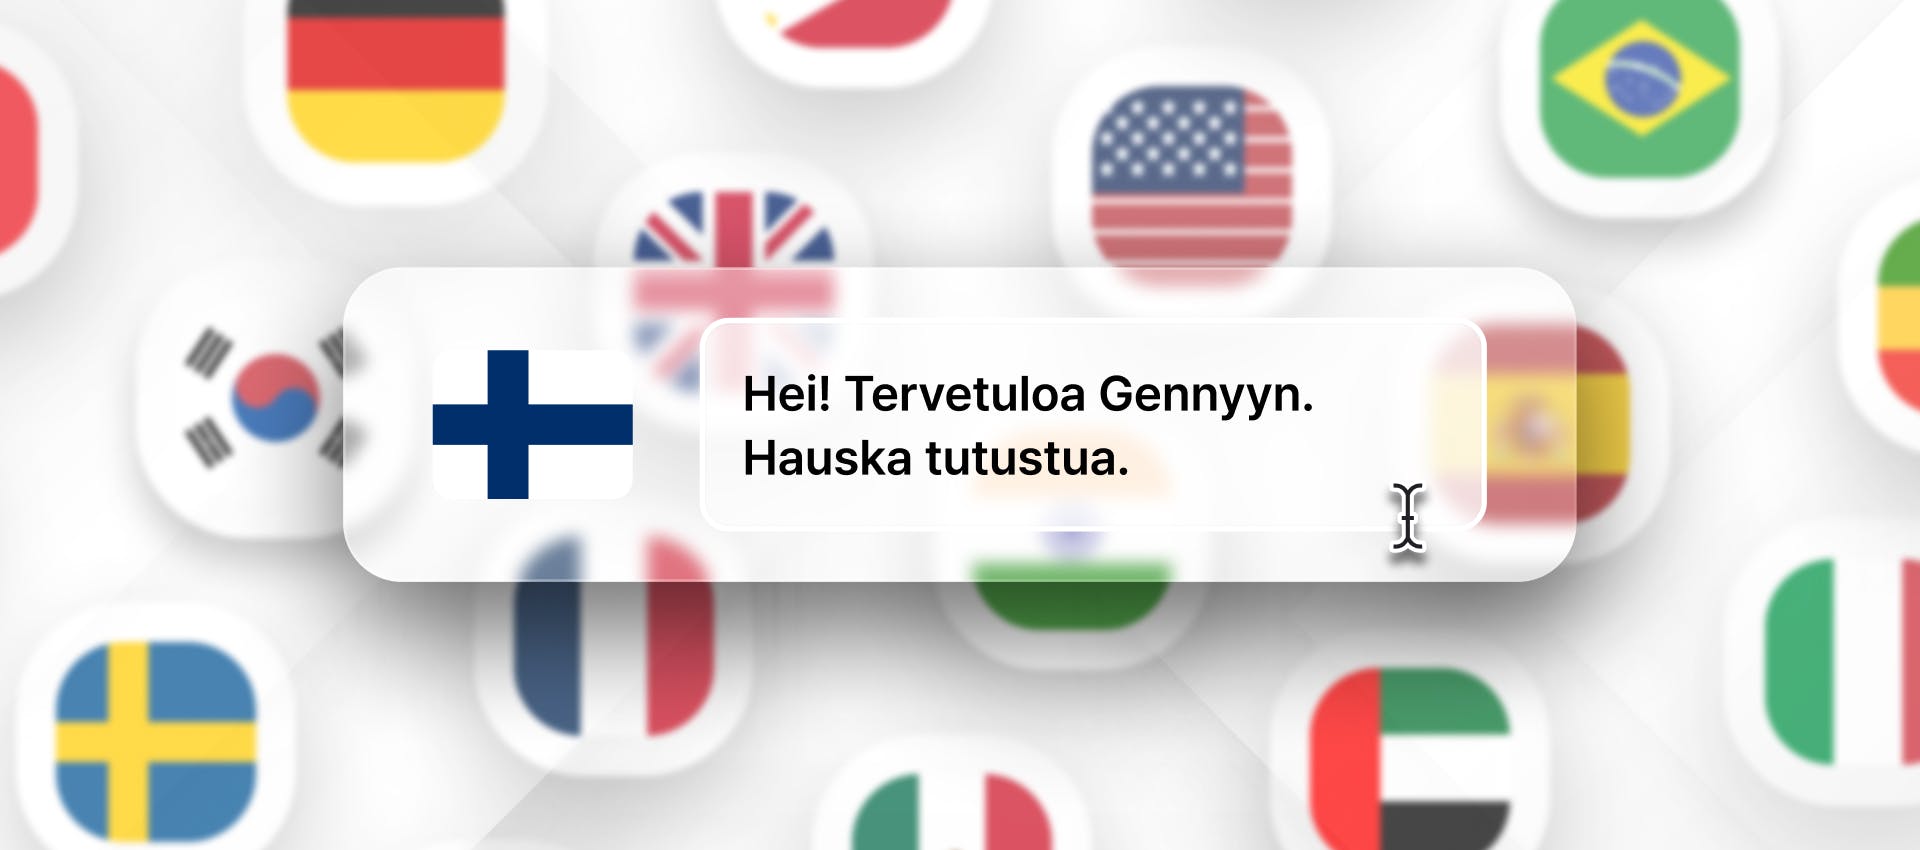 Finnish phrase for Finnish TTS generation with different flags in the background